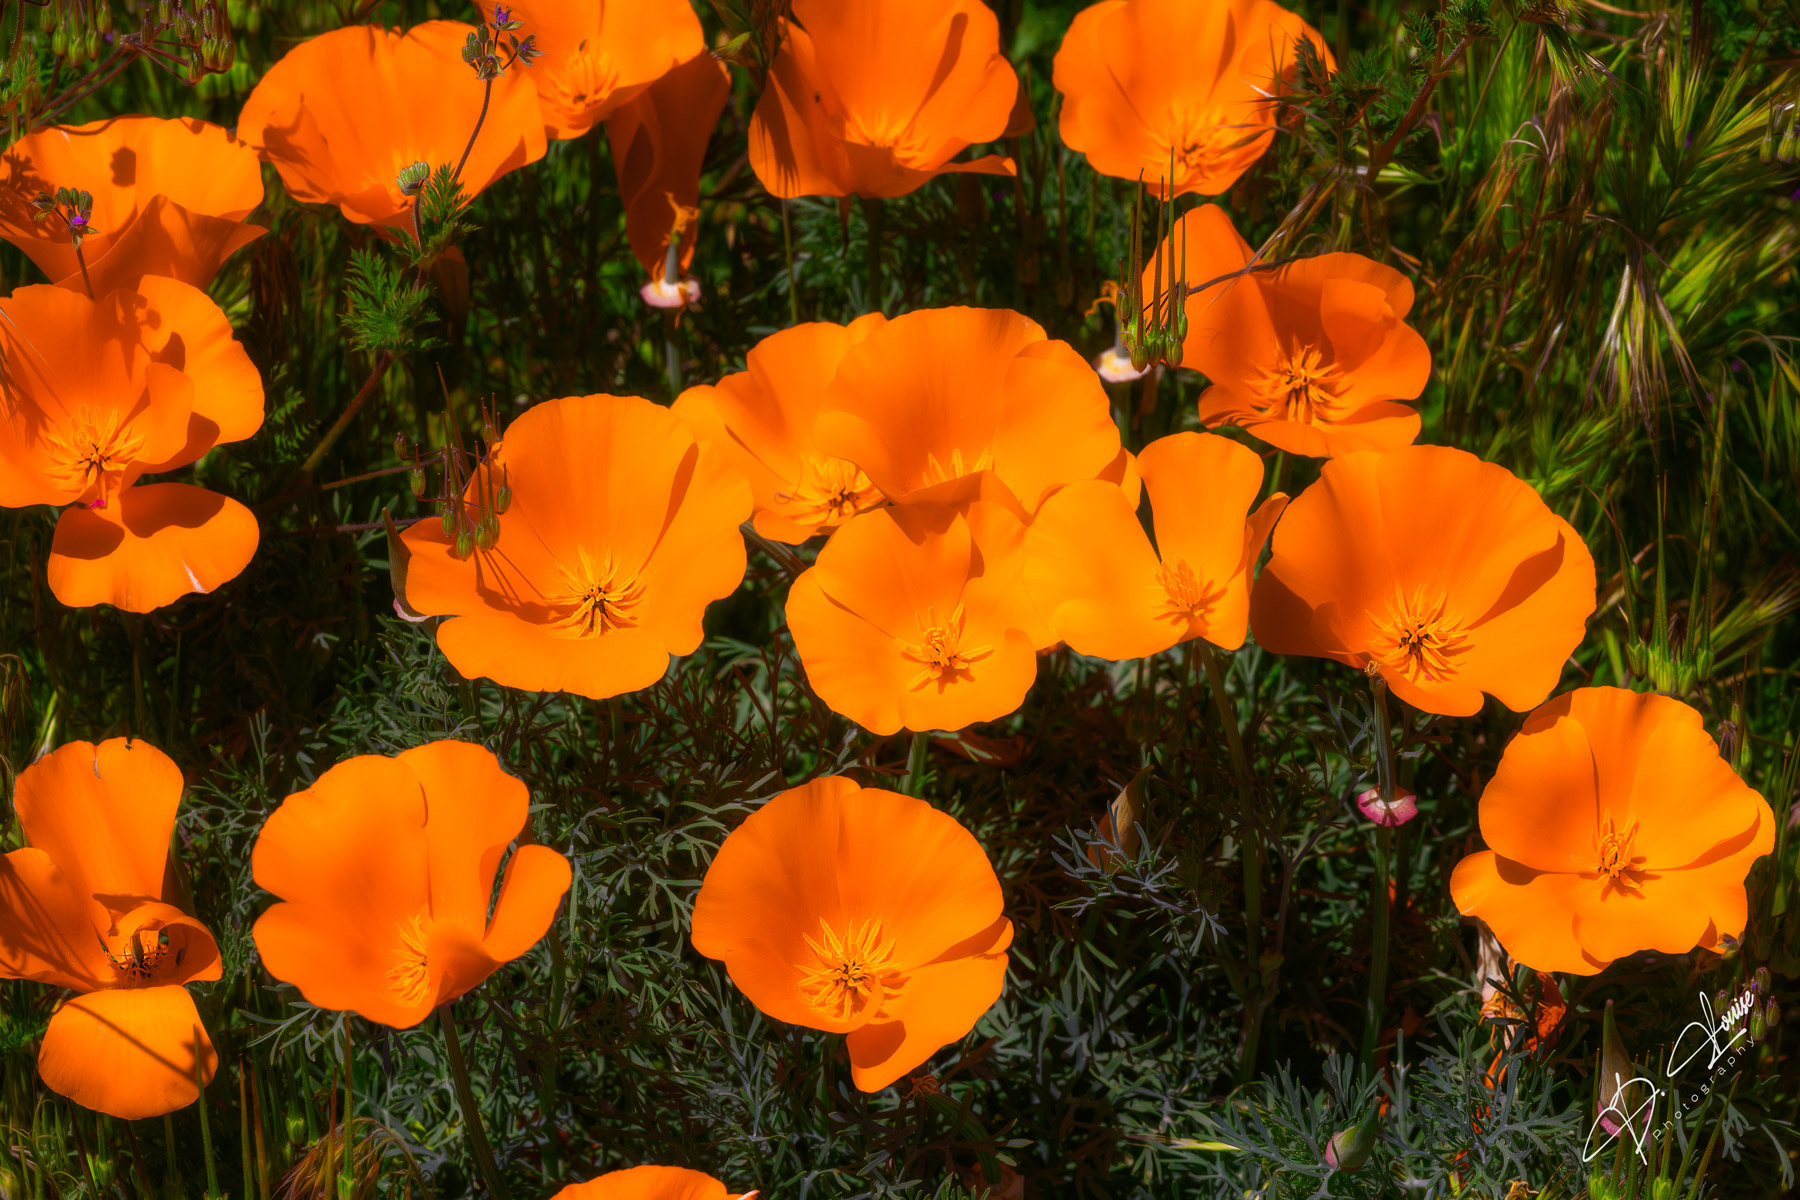 In April, poppies pop up all over the valley areas west of the Sierra Mountains. It's a beautiful orange carpet of color.